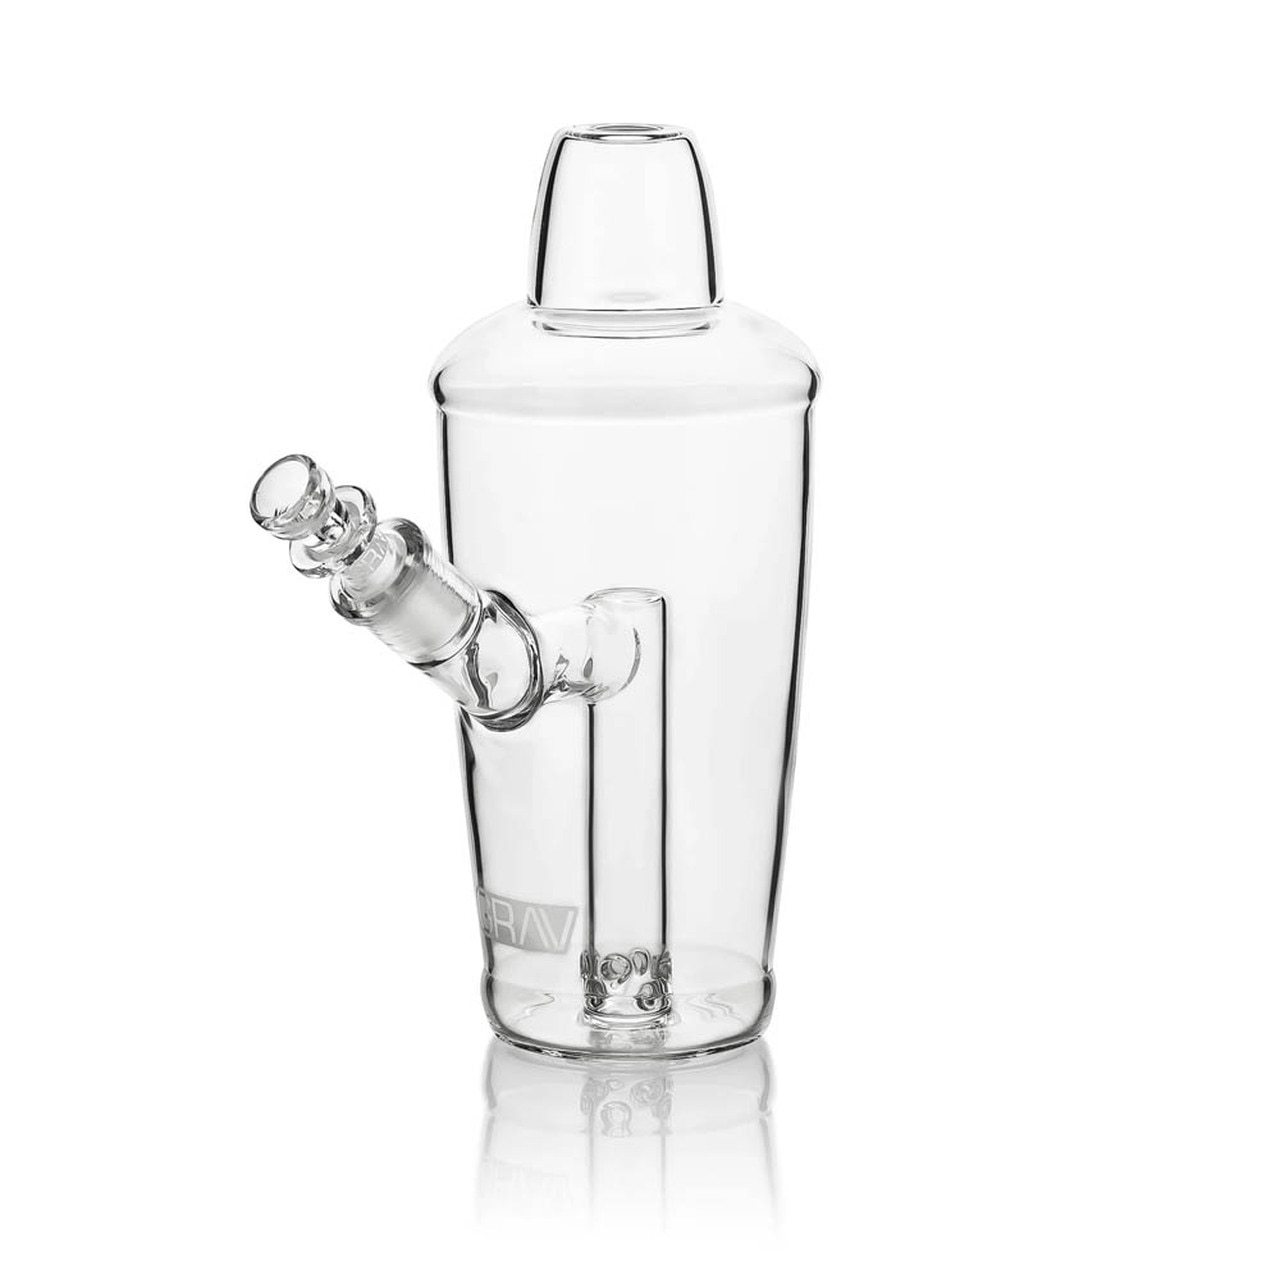 GRAV Sip Series - 7.5" Martini Shaker Bubbler- Clear (14mm Bowl) Fixed 8-Hole Fission Downstem Flower Power Packages 